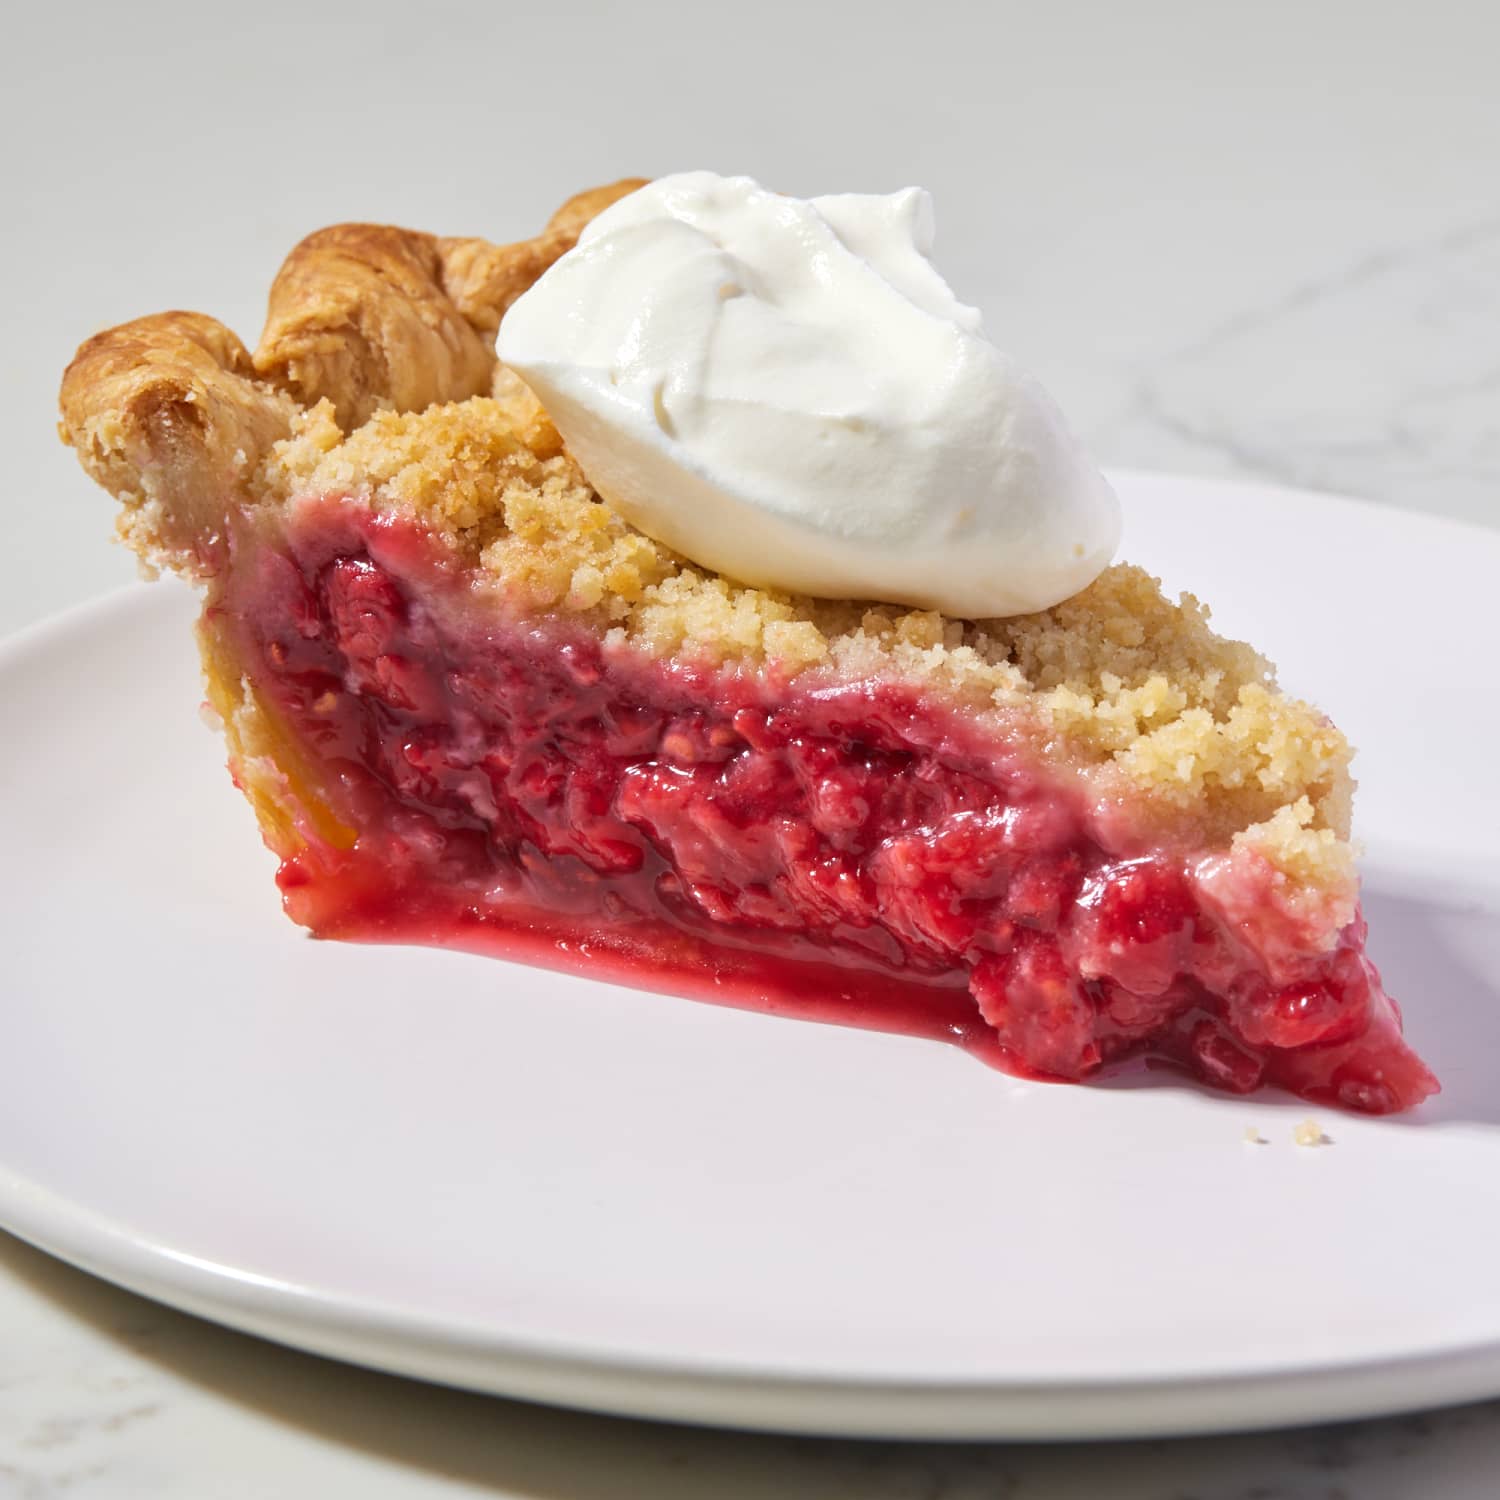 Raspberry Pie Recipe (with Streusel Topping)